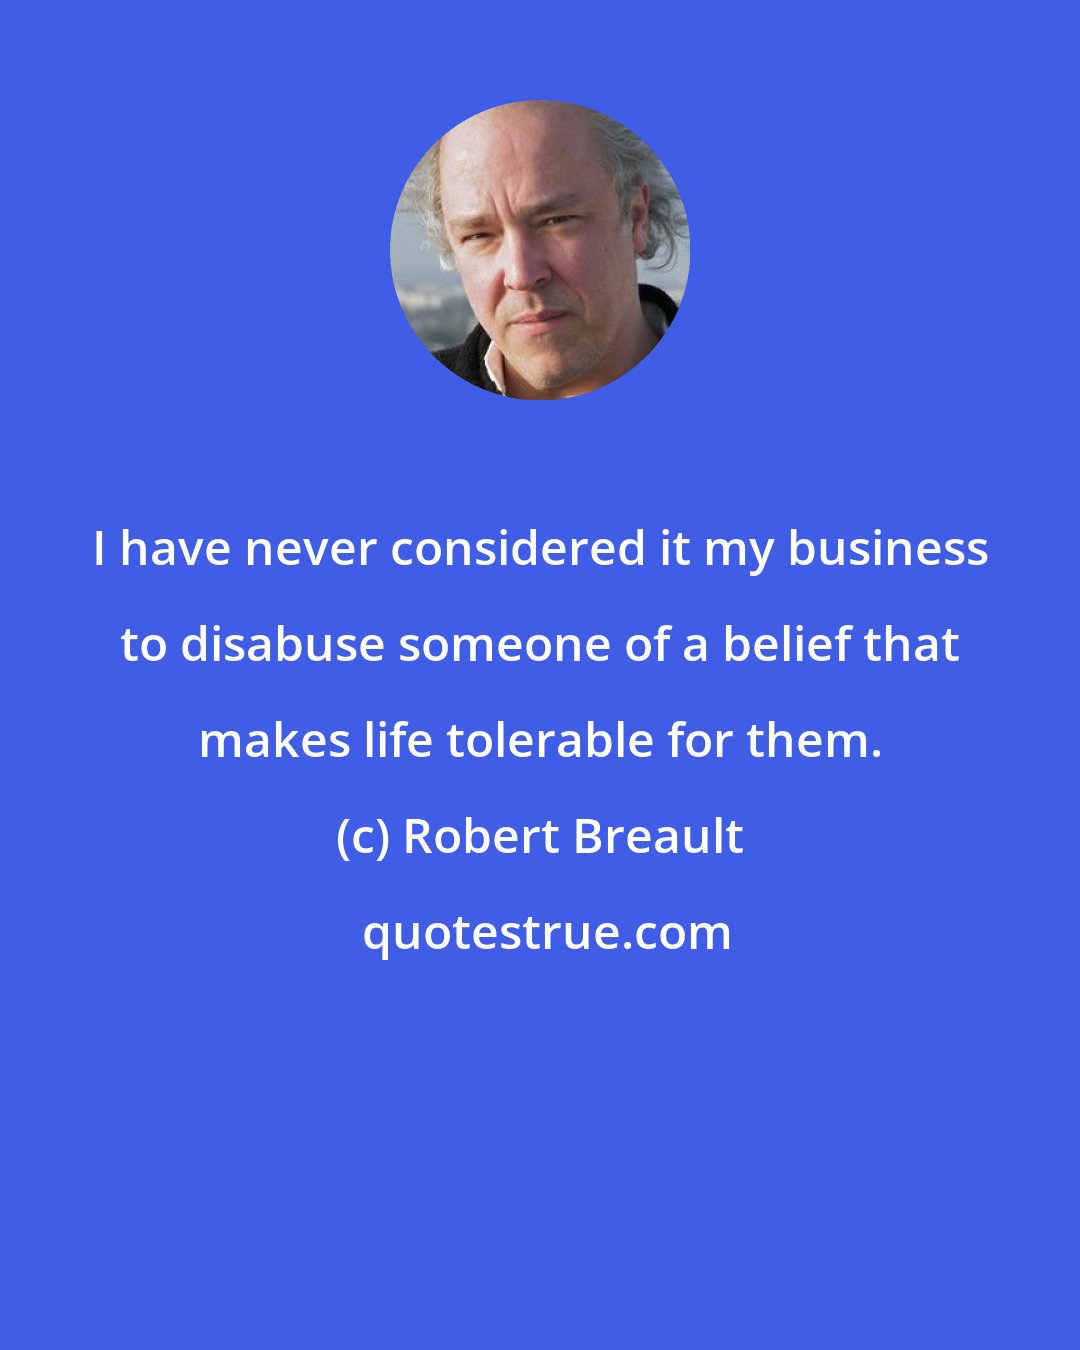 Robert Breault: I have never considered it my business to disabuse someone of a belief that makes life tolerable for them.